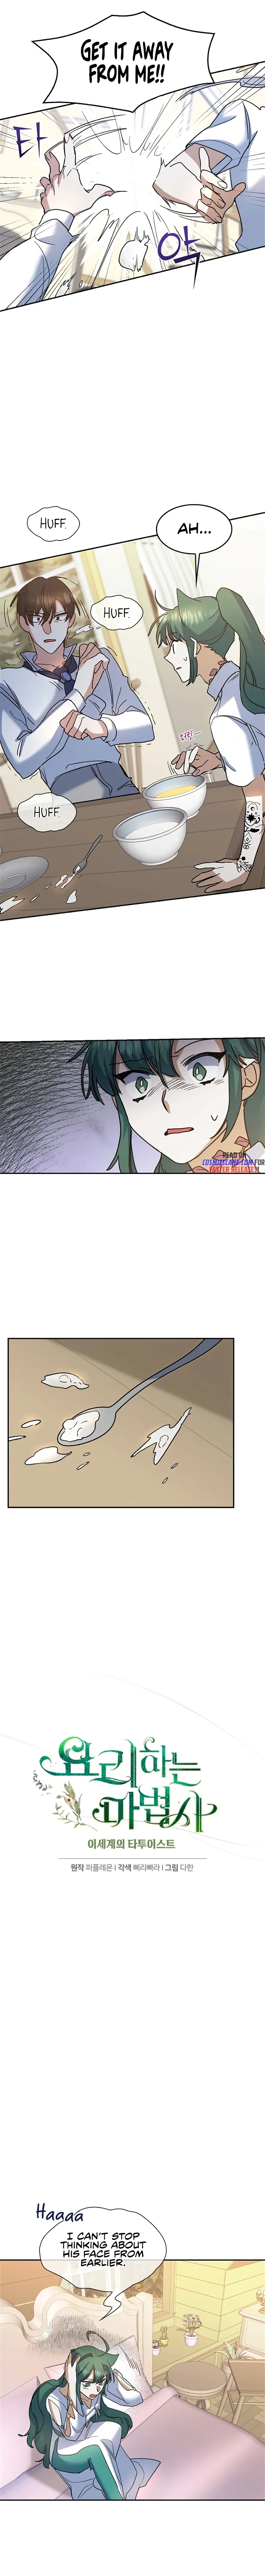 Cooking Wizard Chapter 30 page 8